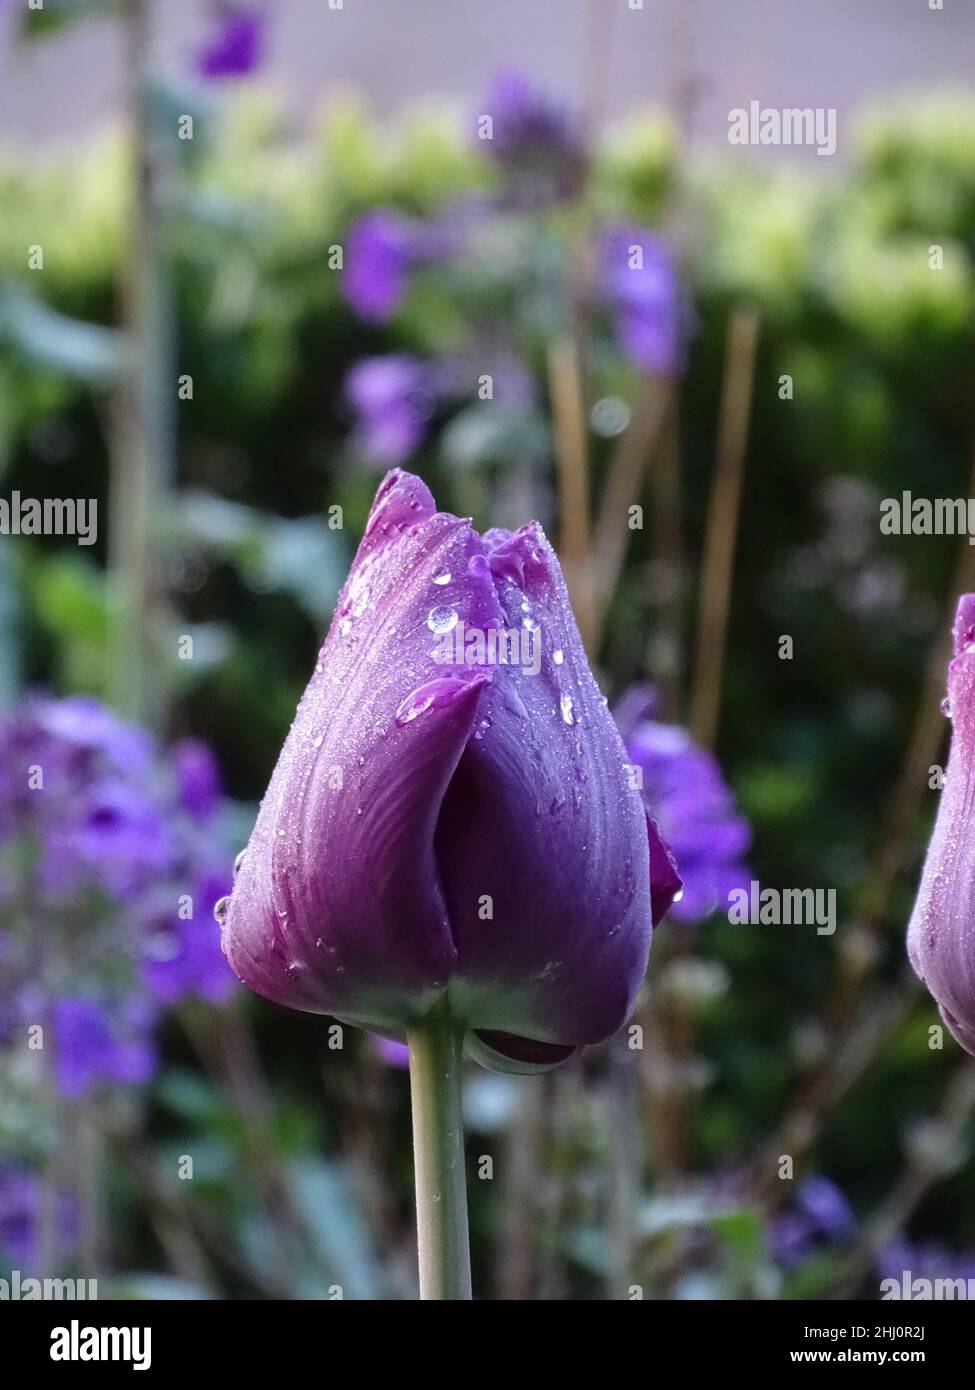 close up of a purple tulip with raindrops on the petals, blurred green and purple background, colors brown, purple and green Stock Photo